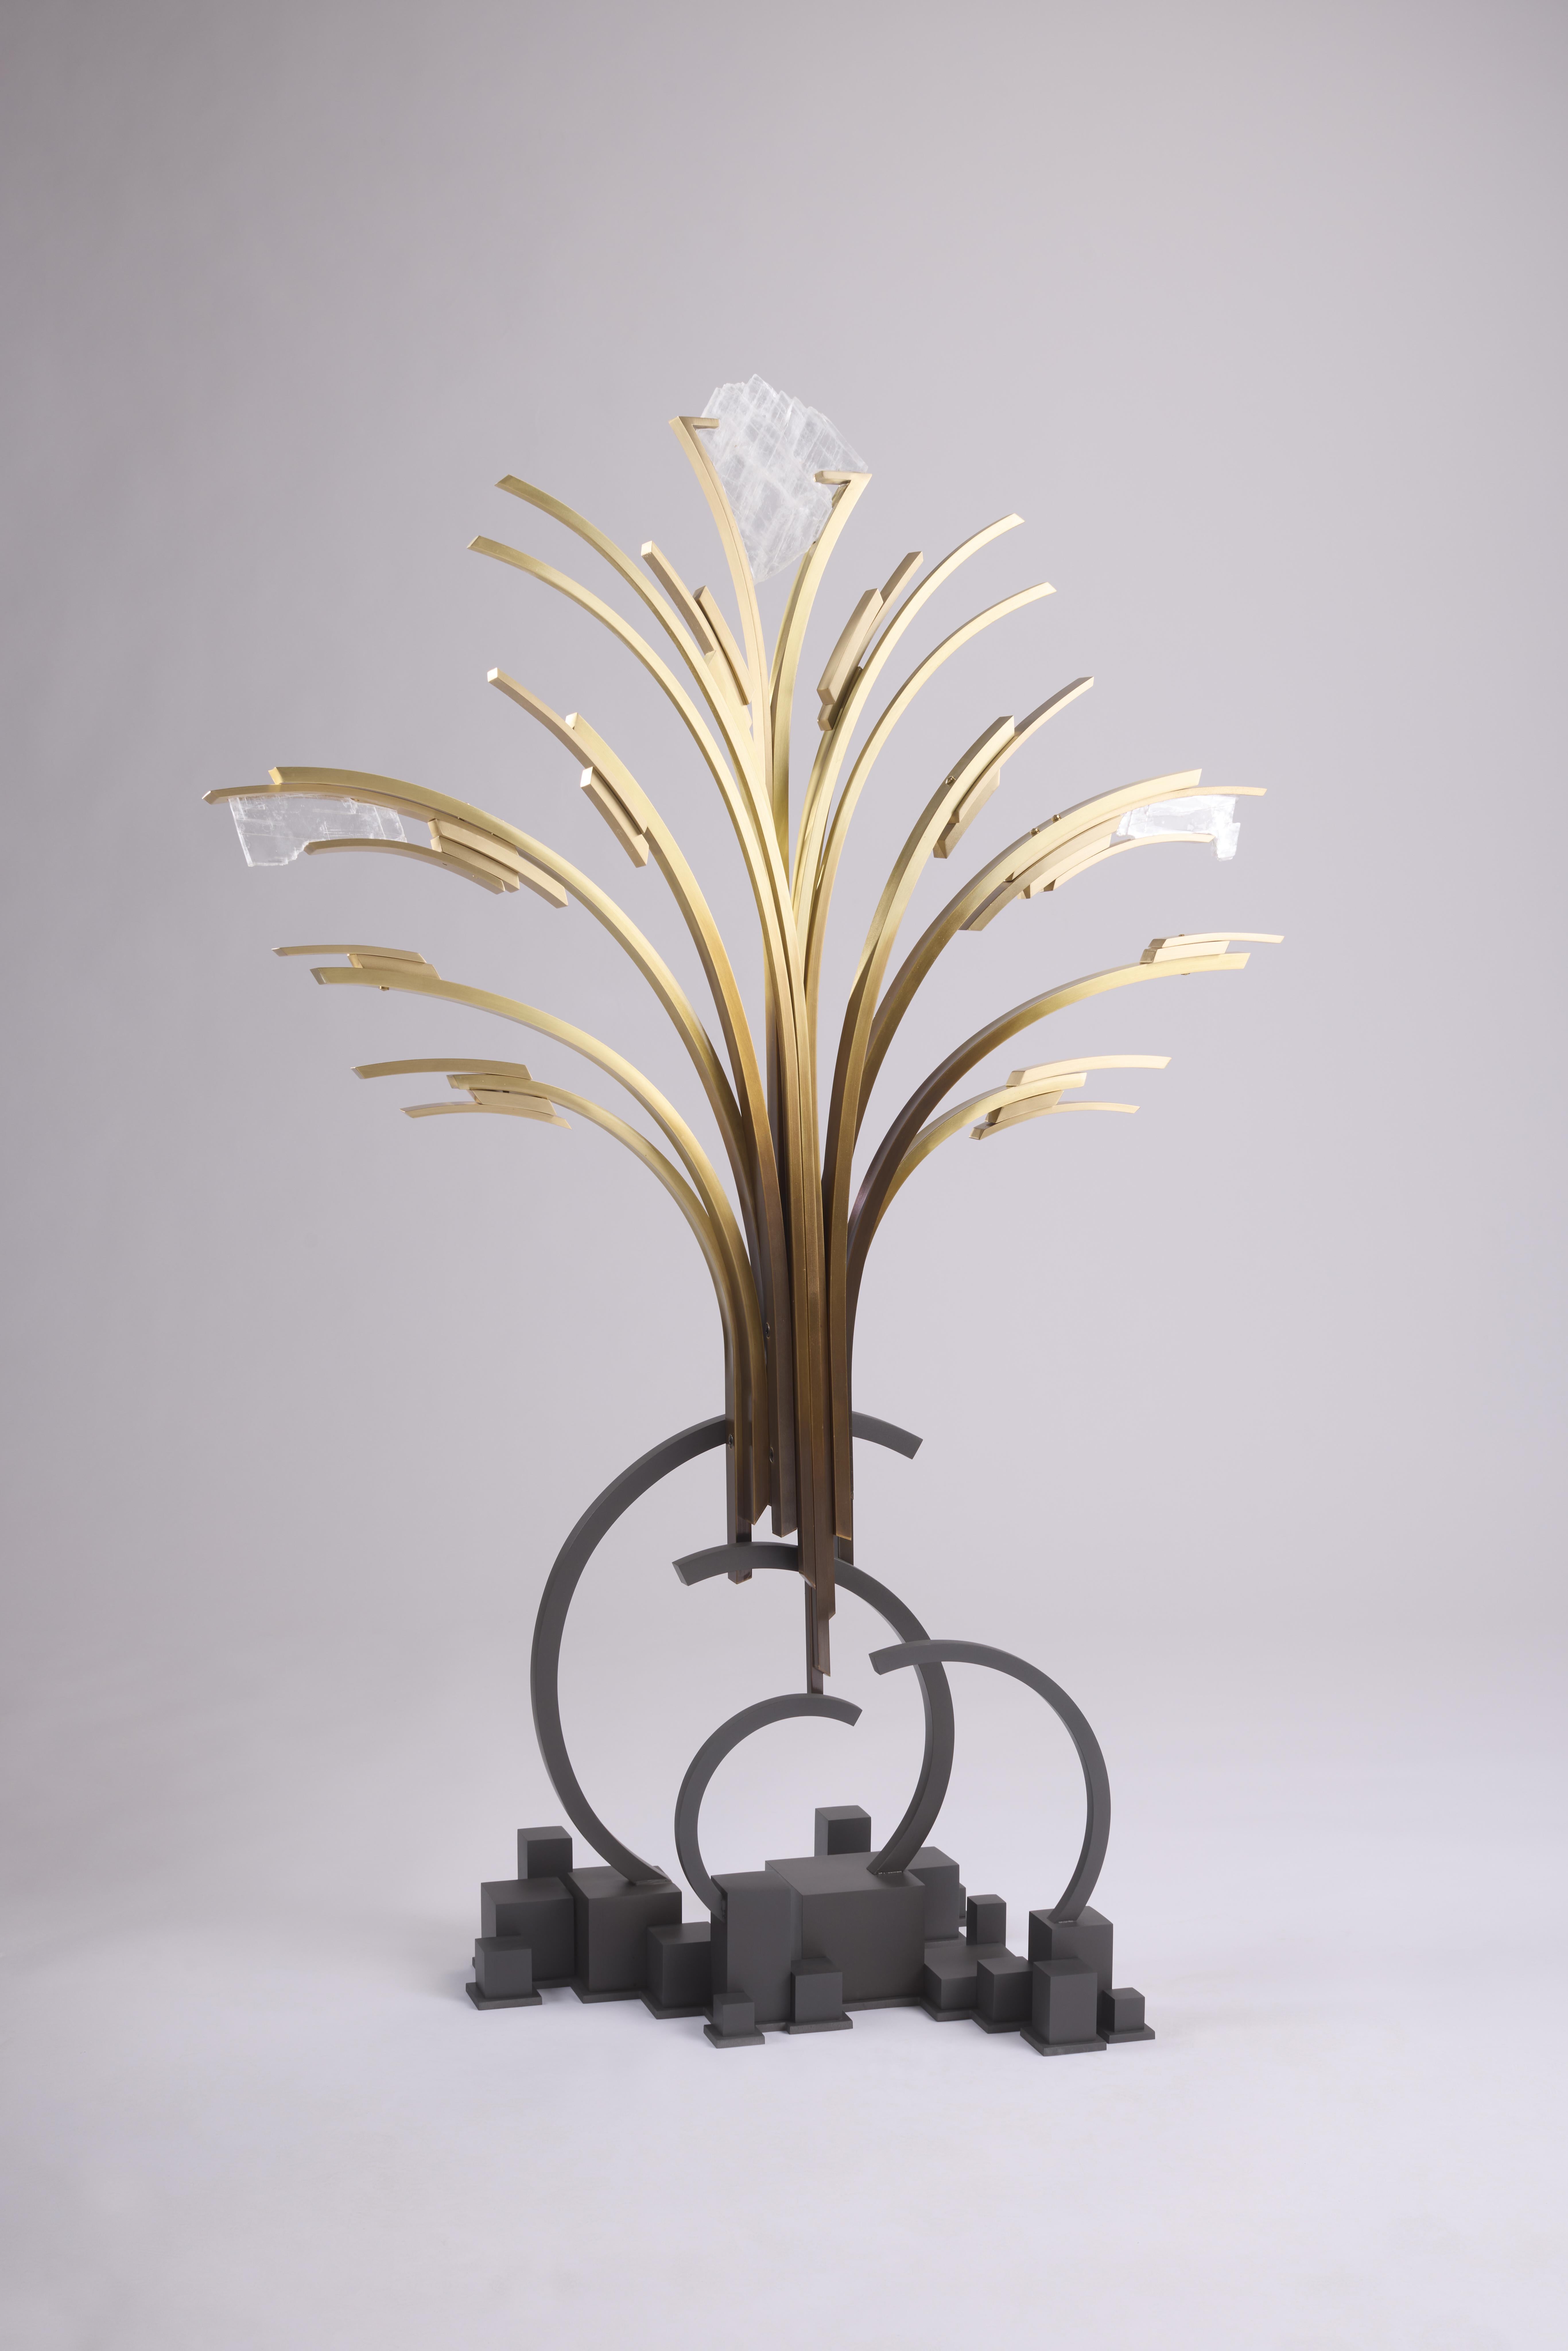 Material : steel, brass, Selenite stone
Finish : sandblasted steel and satin gunmetal, brass with a shaded patina and glossy varnish Weight : 20 kg

___

This floral imaginary presents a bouquet emerging from the earth, as if in suspension. The